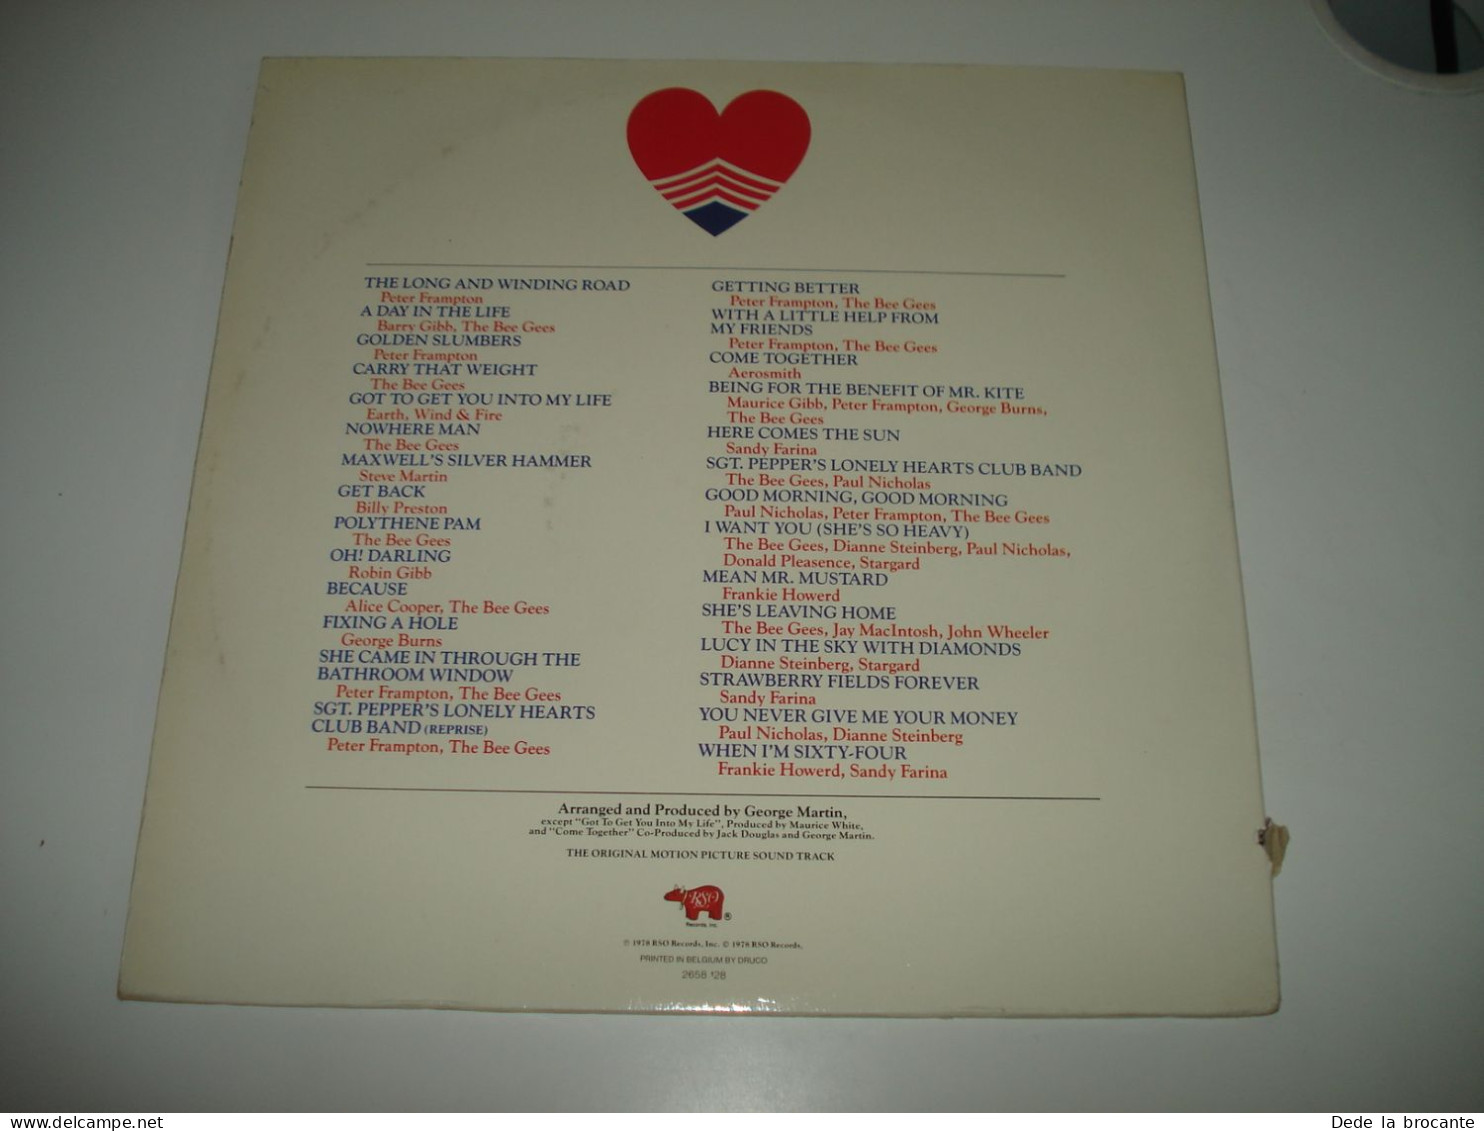 B8 / Sgt Pepper's Lonely Hearts Club Band  Bee Gees - 2658 128 - BE 1978 - M/VG+ - Filmmuziek